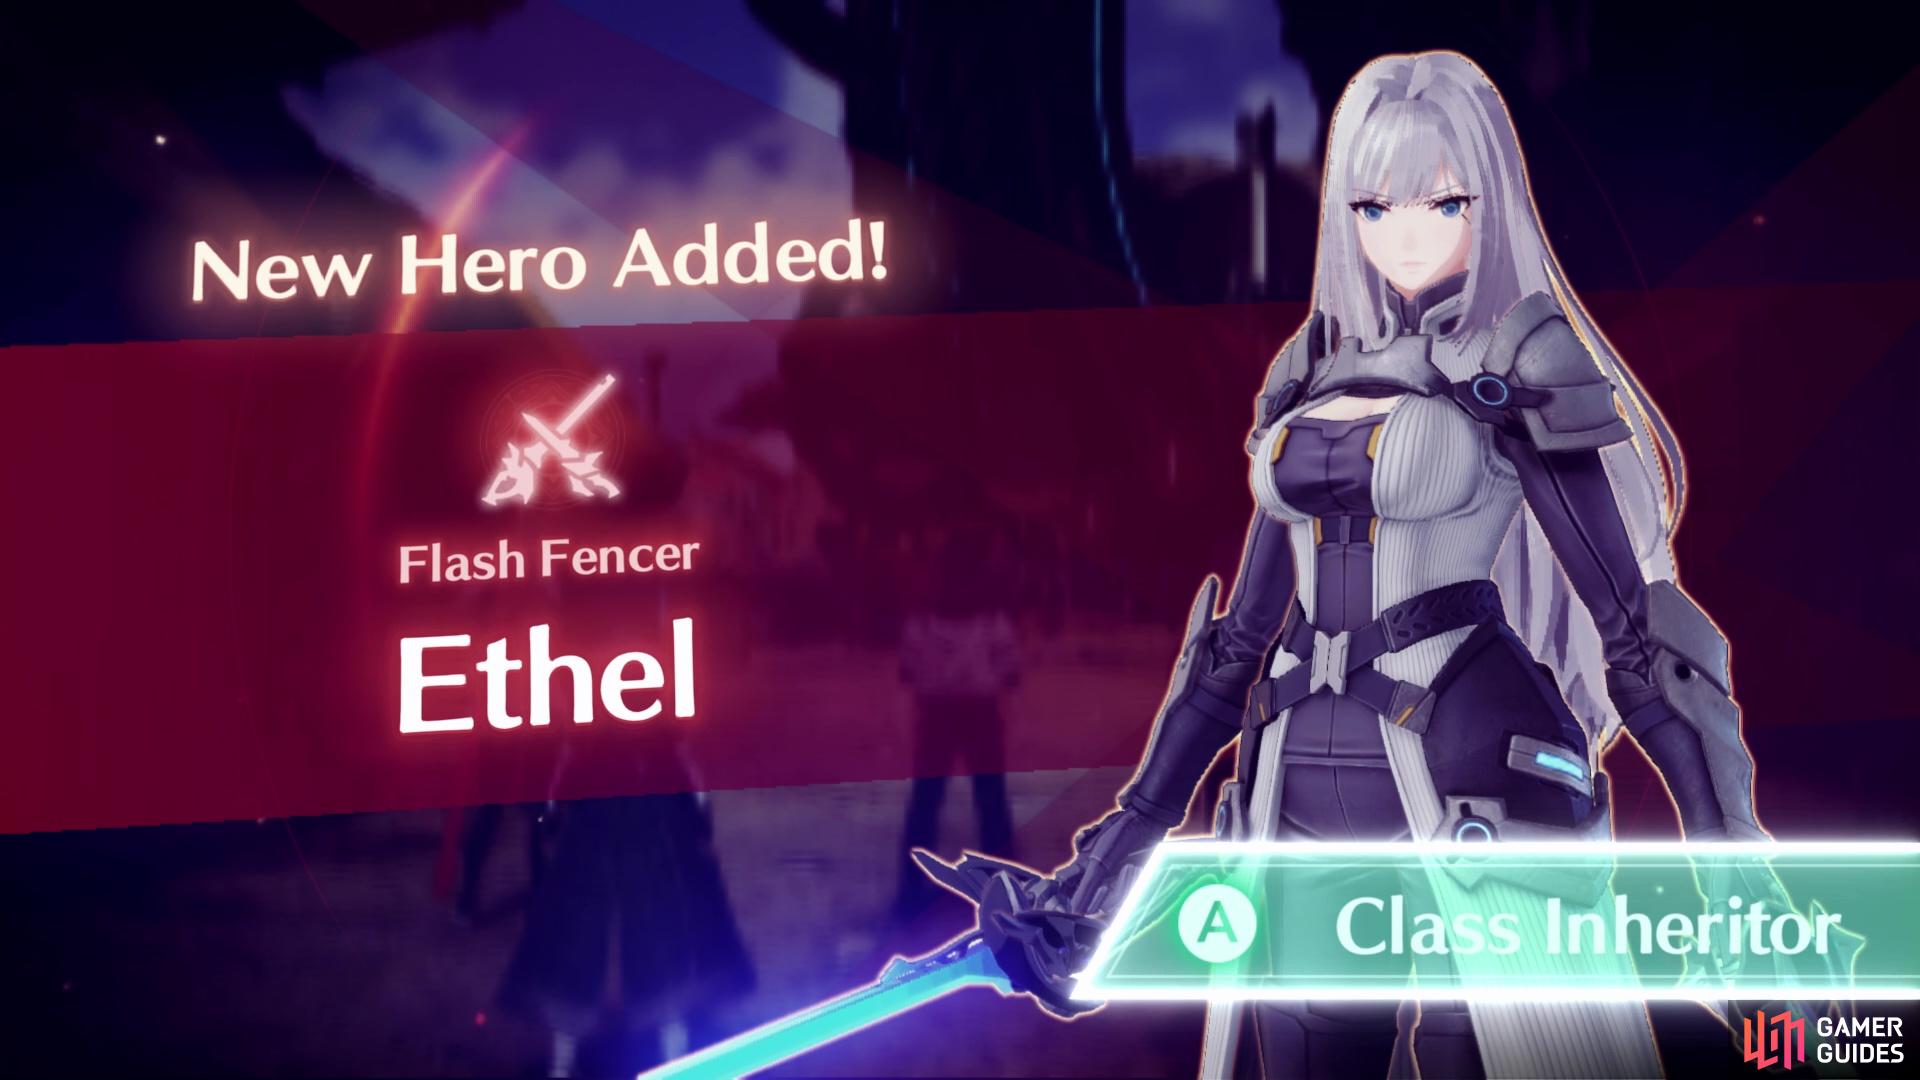 You'll now have Ethel in your party!